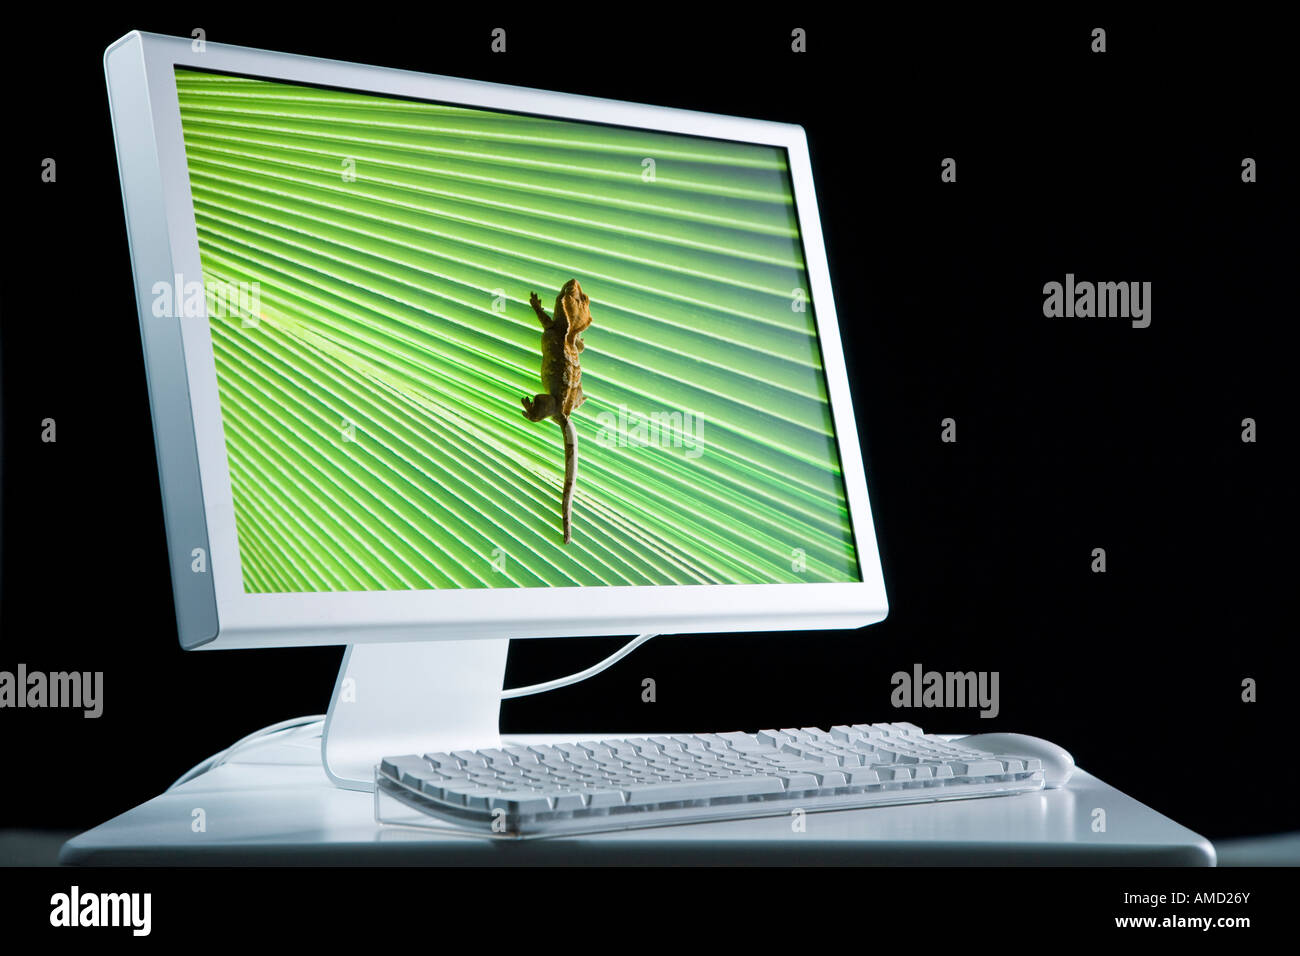 Computer monitor with lizard Stock Photo